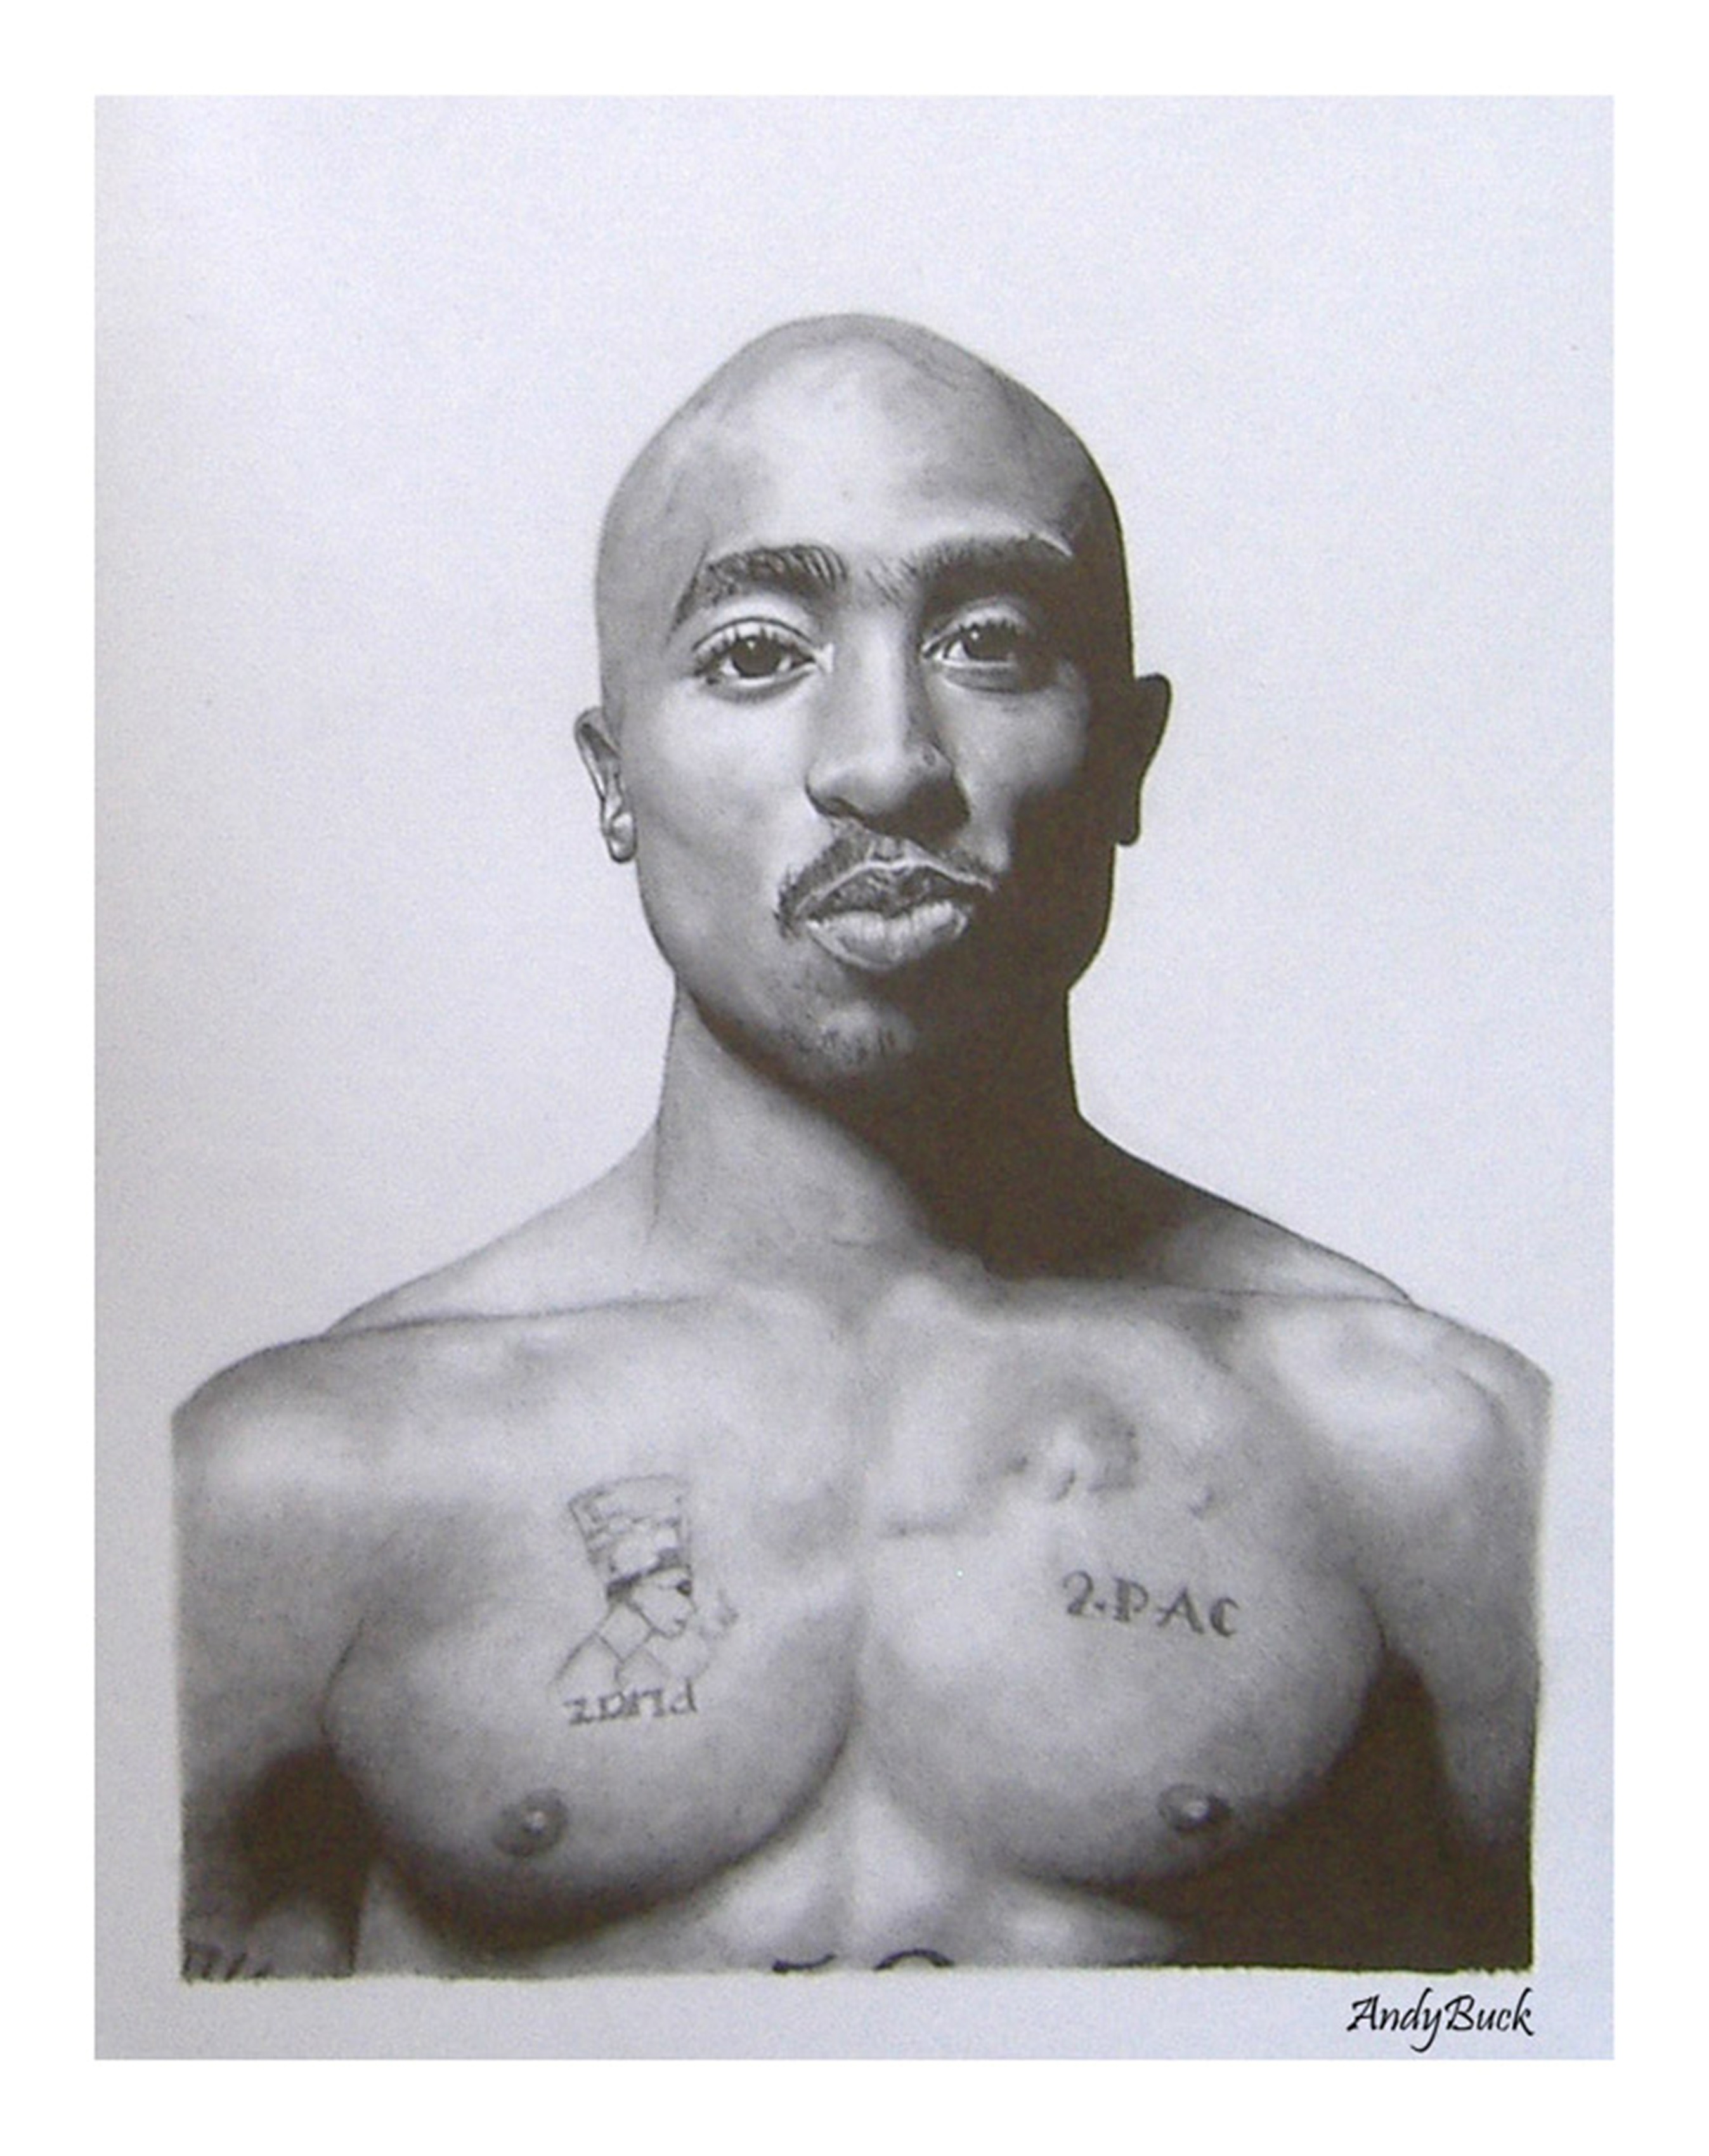 2-PAC by Andy Buck